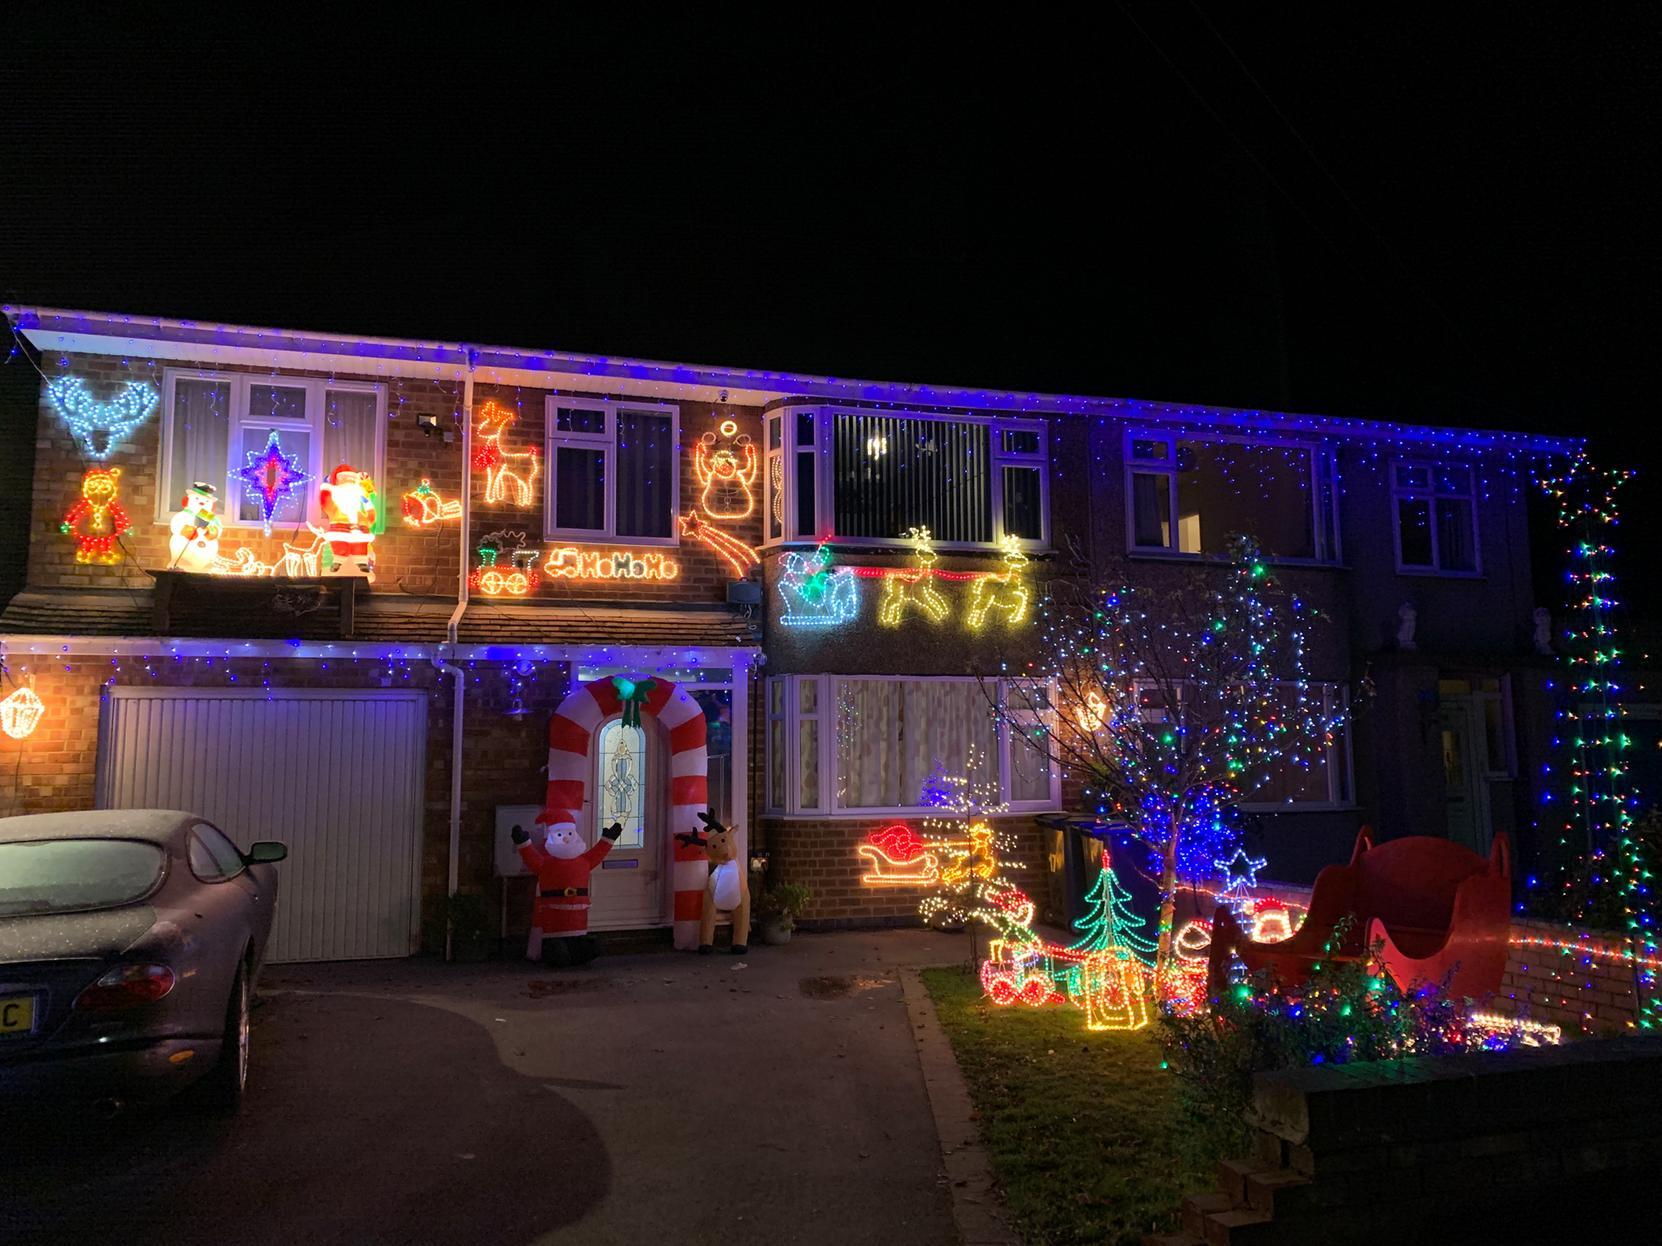 This photo was taken by Michelle Guppy of her house in Elms Drive, Rugby. She said: "Our son Jacob is autistic, PDA and has life threatening medical condition (cah) he does not enjoy Christmas day as the change, surprises and demands are to much but the lights are what makes his Christmas. Every year he saves his pocket money and adds to his already huge collection! This year he spent the whole of his six weeks holiday building a life size sleigh and would love to invite people big or small to come along and sit in it for Christmas photos with lights behind."